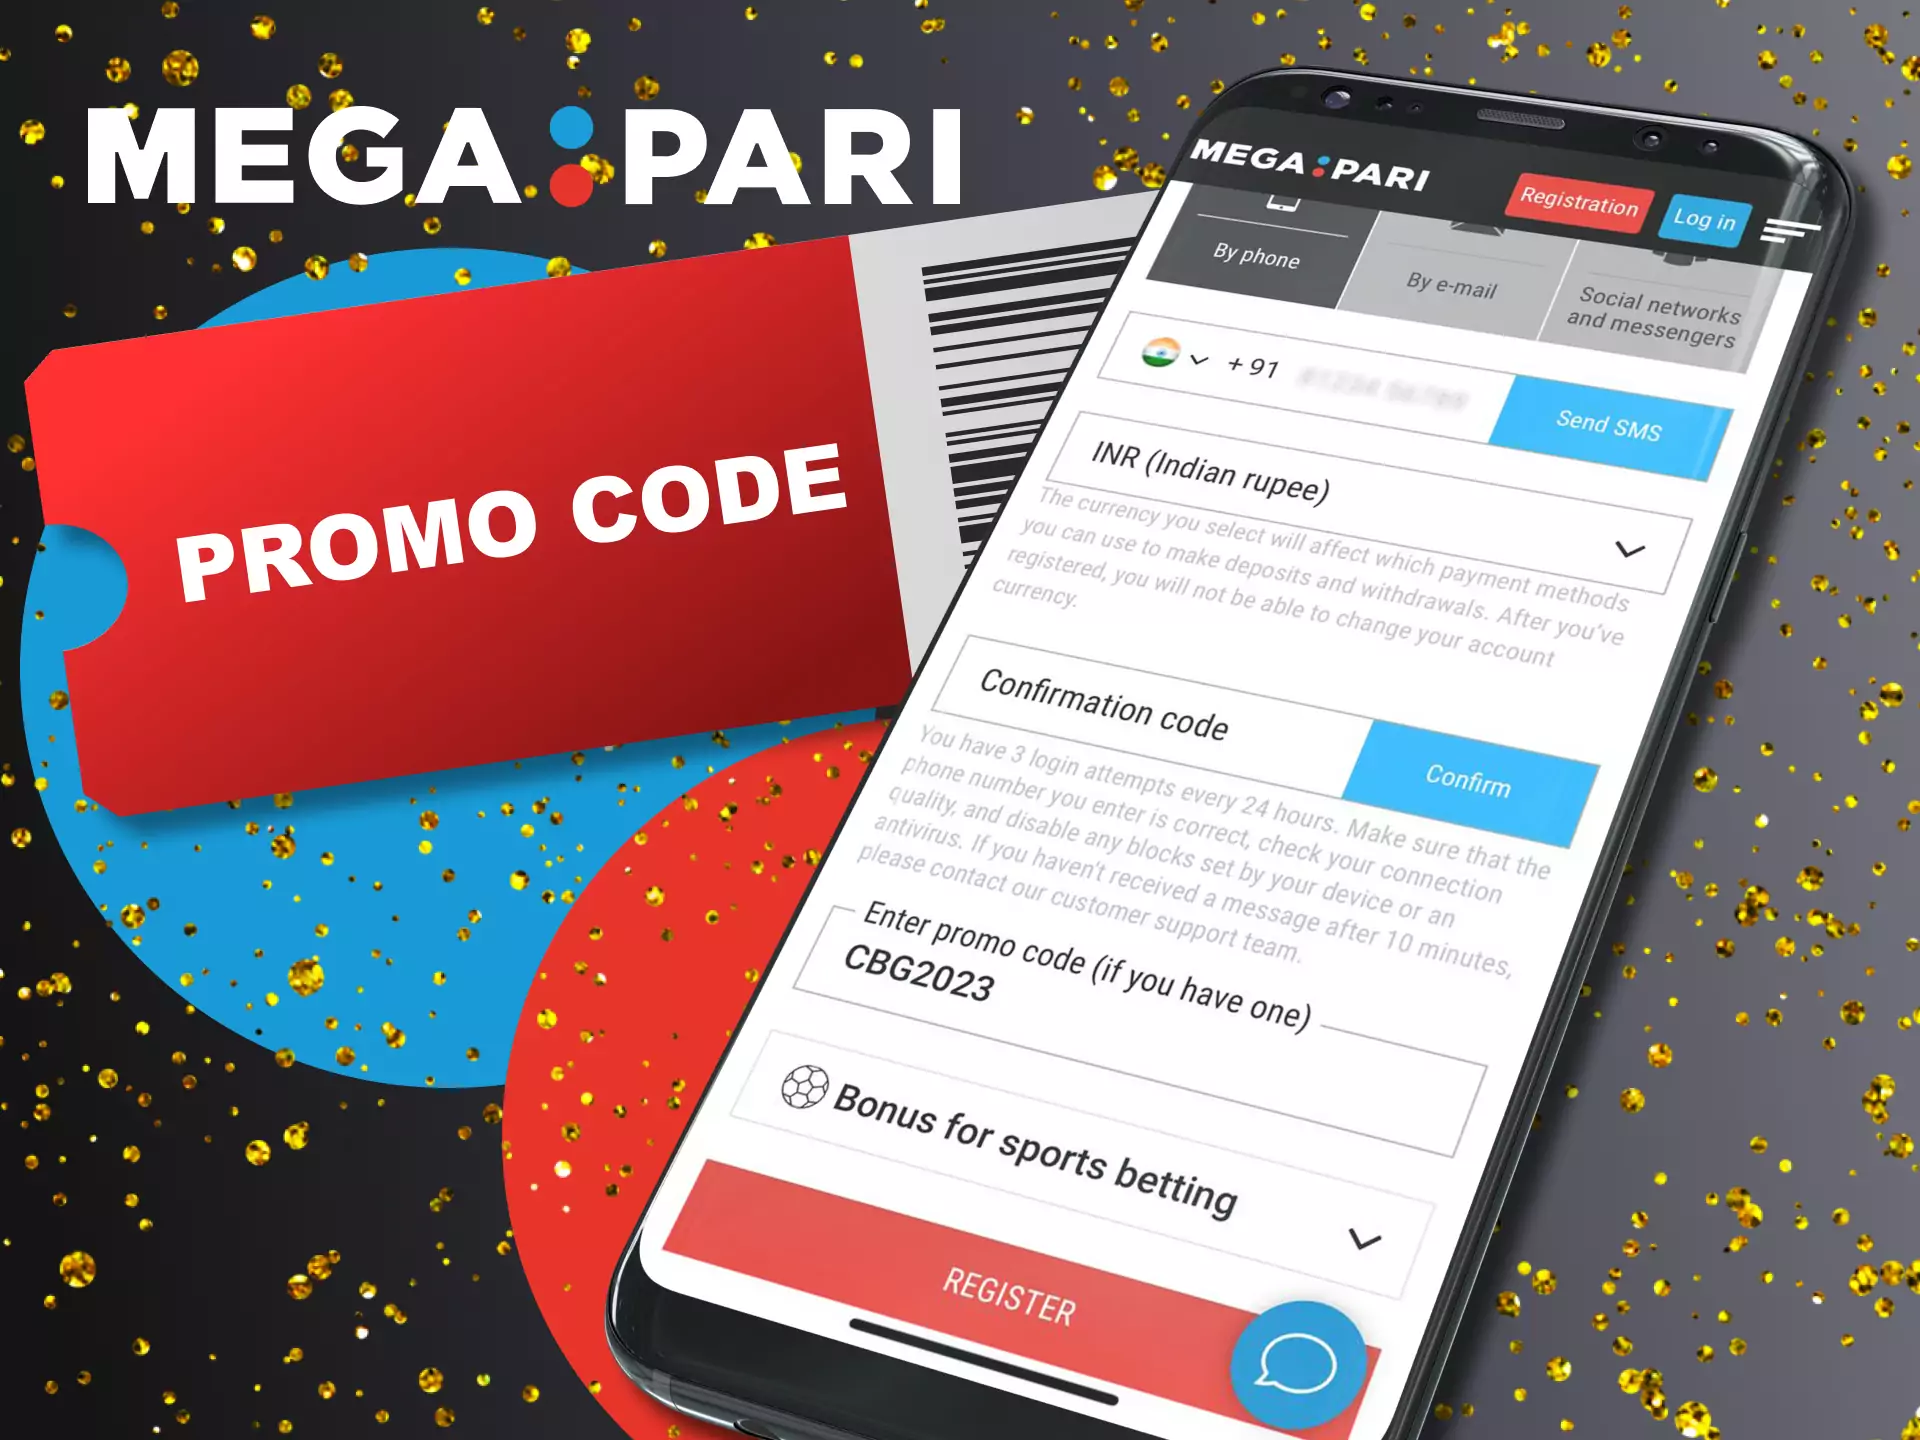 When registering on the Megapari app be sure to apply a promo code.